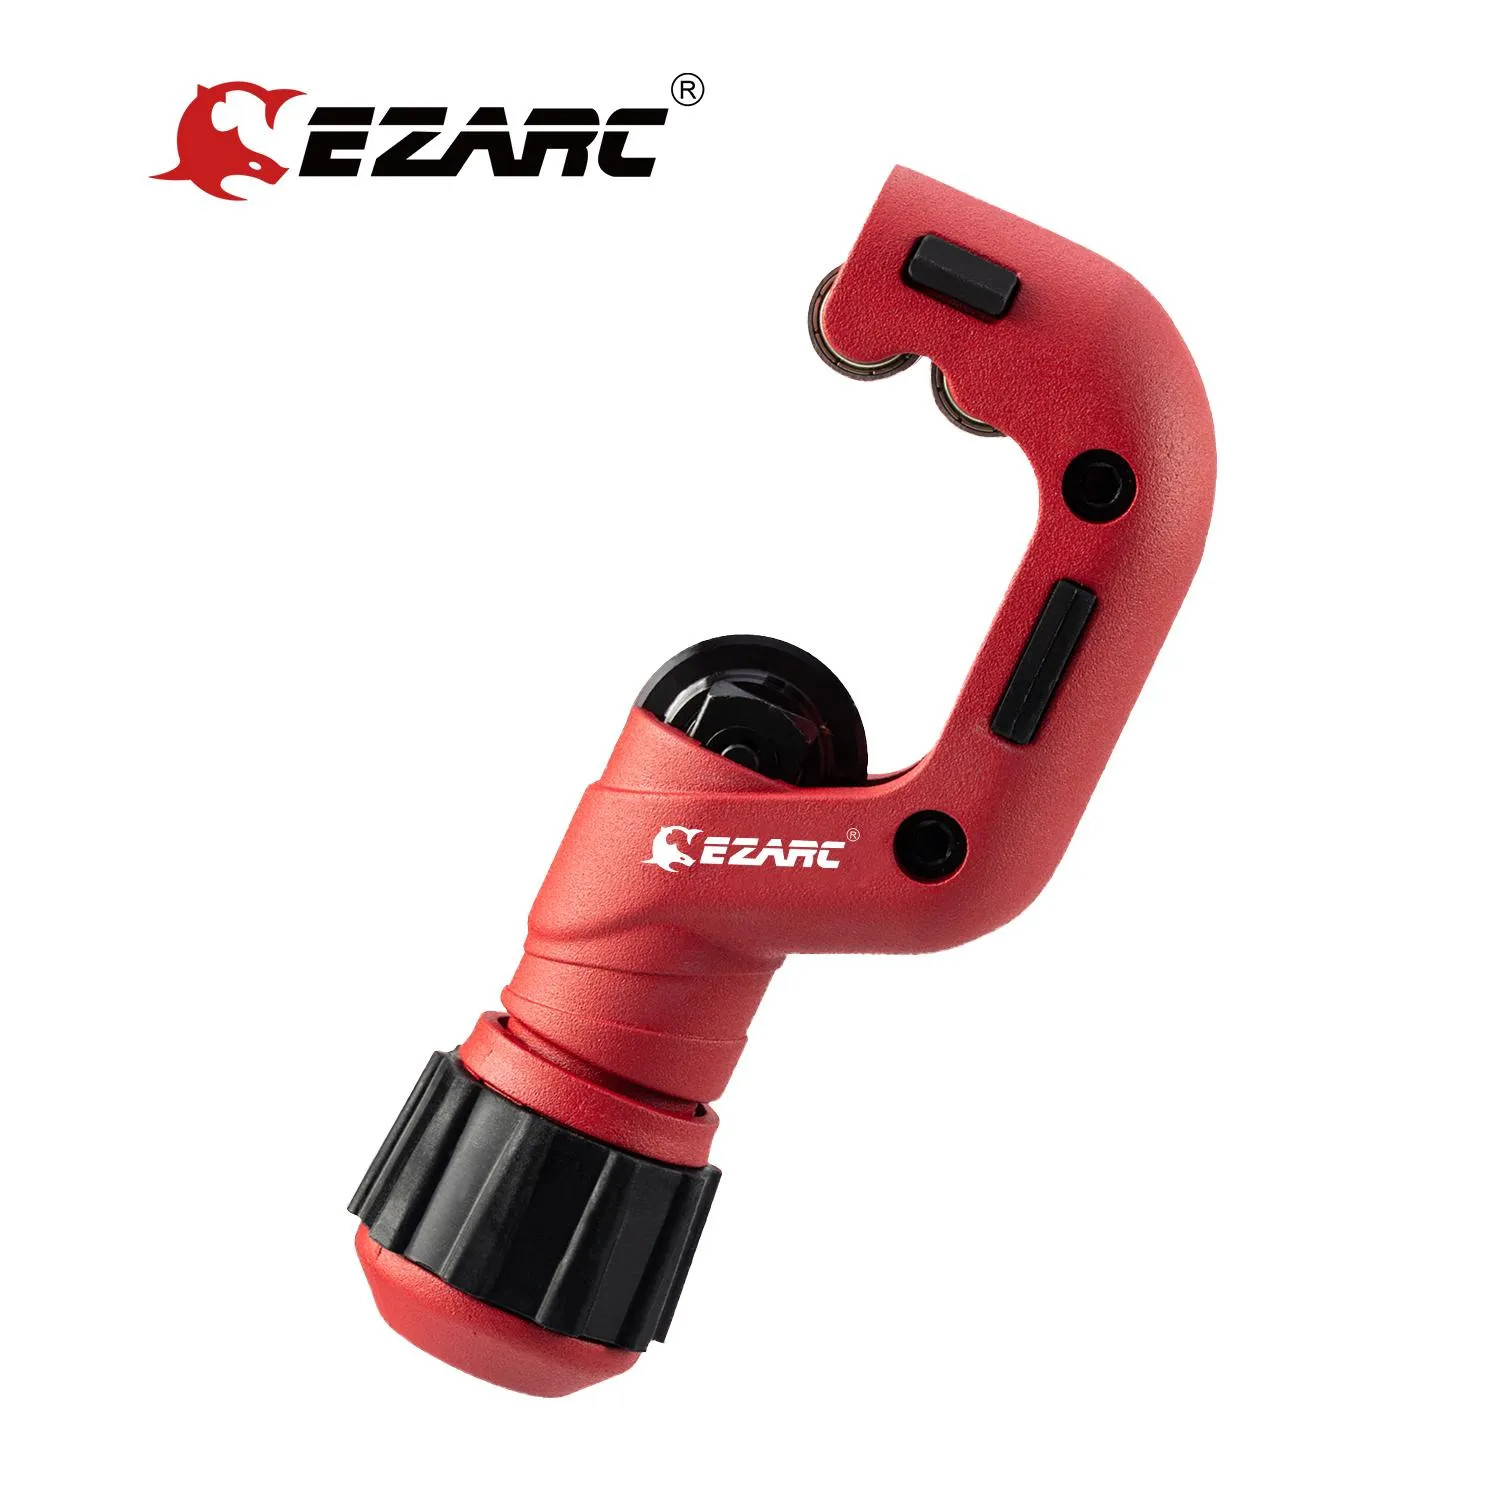 Schaar EZARC Tubing Cutter Copper Pipe Cutter 4mm to 32mm Heavy Duty Tube Cutter Tool Cutting Copper Aluminum Thin Stainless Steel Tube